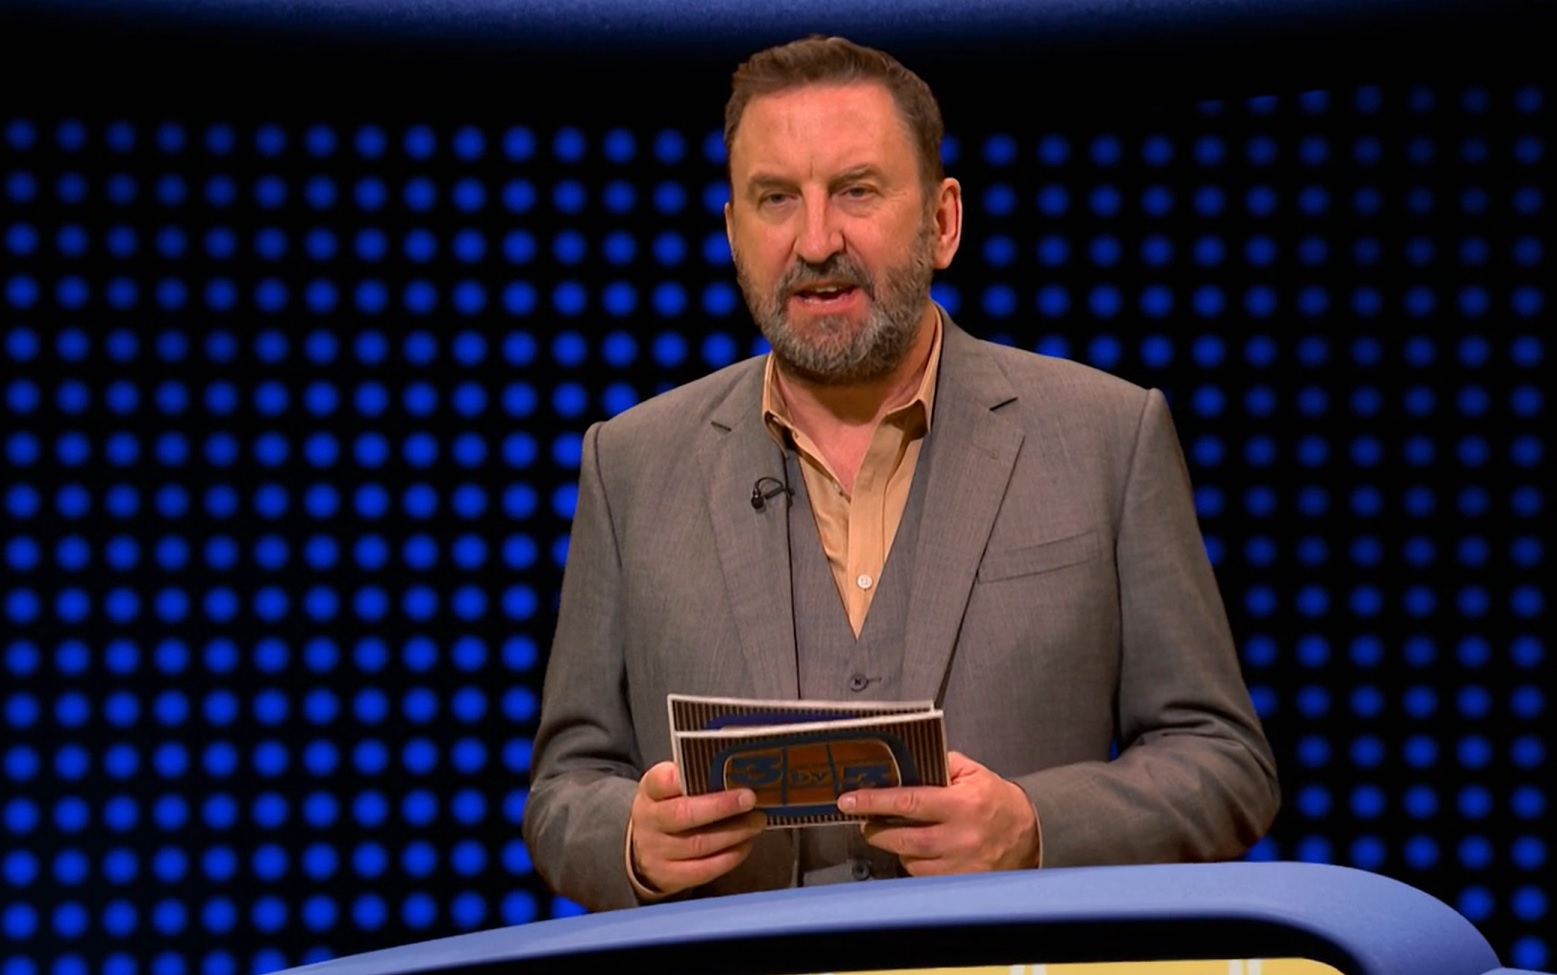 BBC viewers were left traumatised after seeing contestant’s head explode in ‘Lee Mack quiz show’